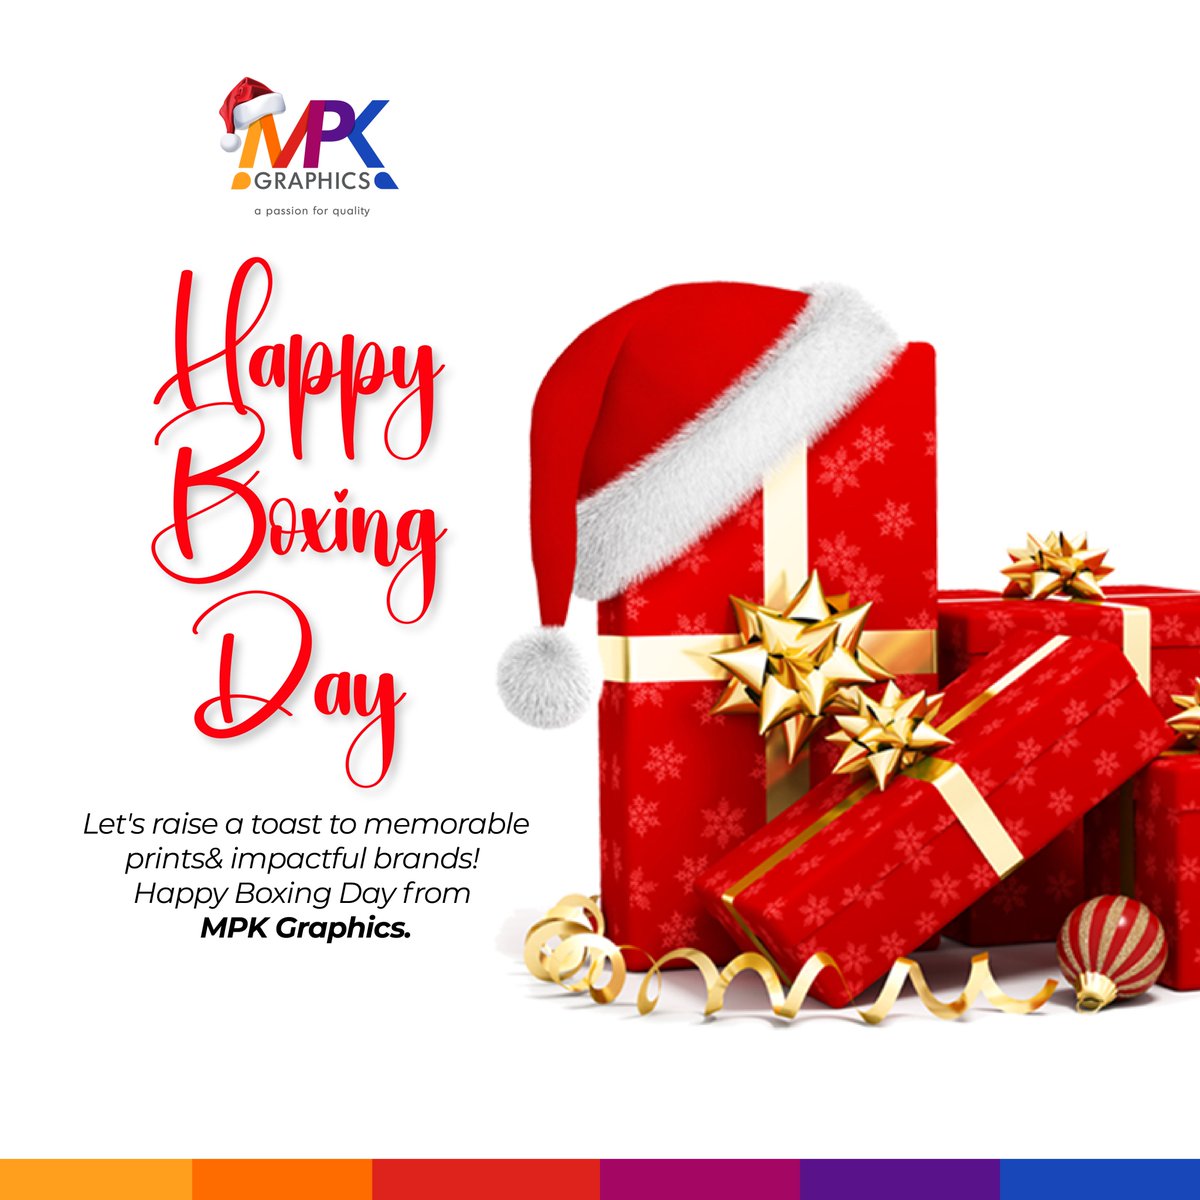 May you unwrap love, laughter, happiness and the best printing services this #BoxingDay